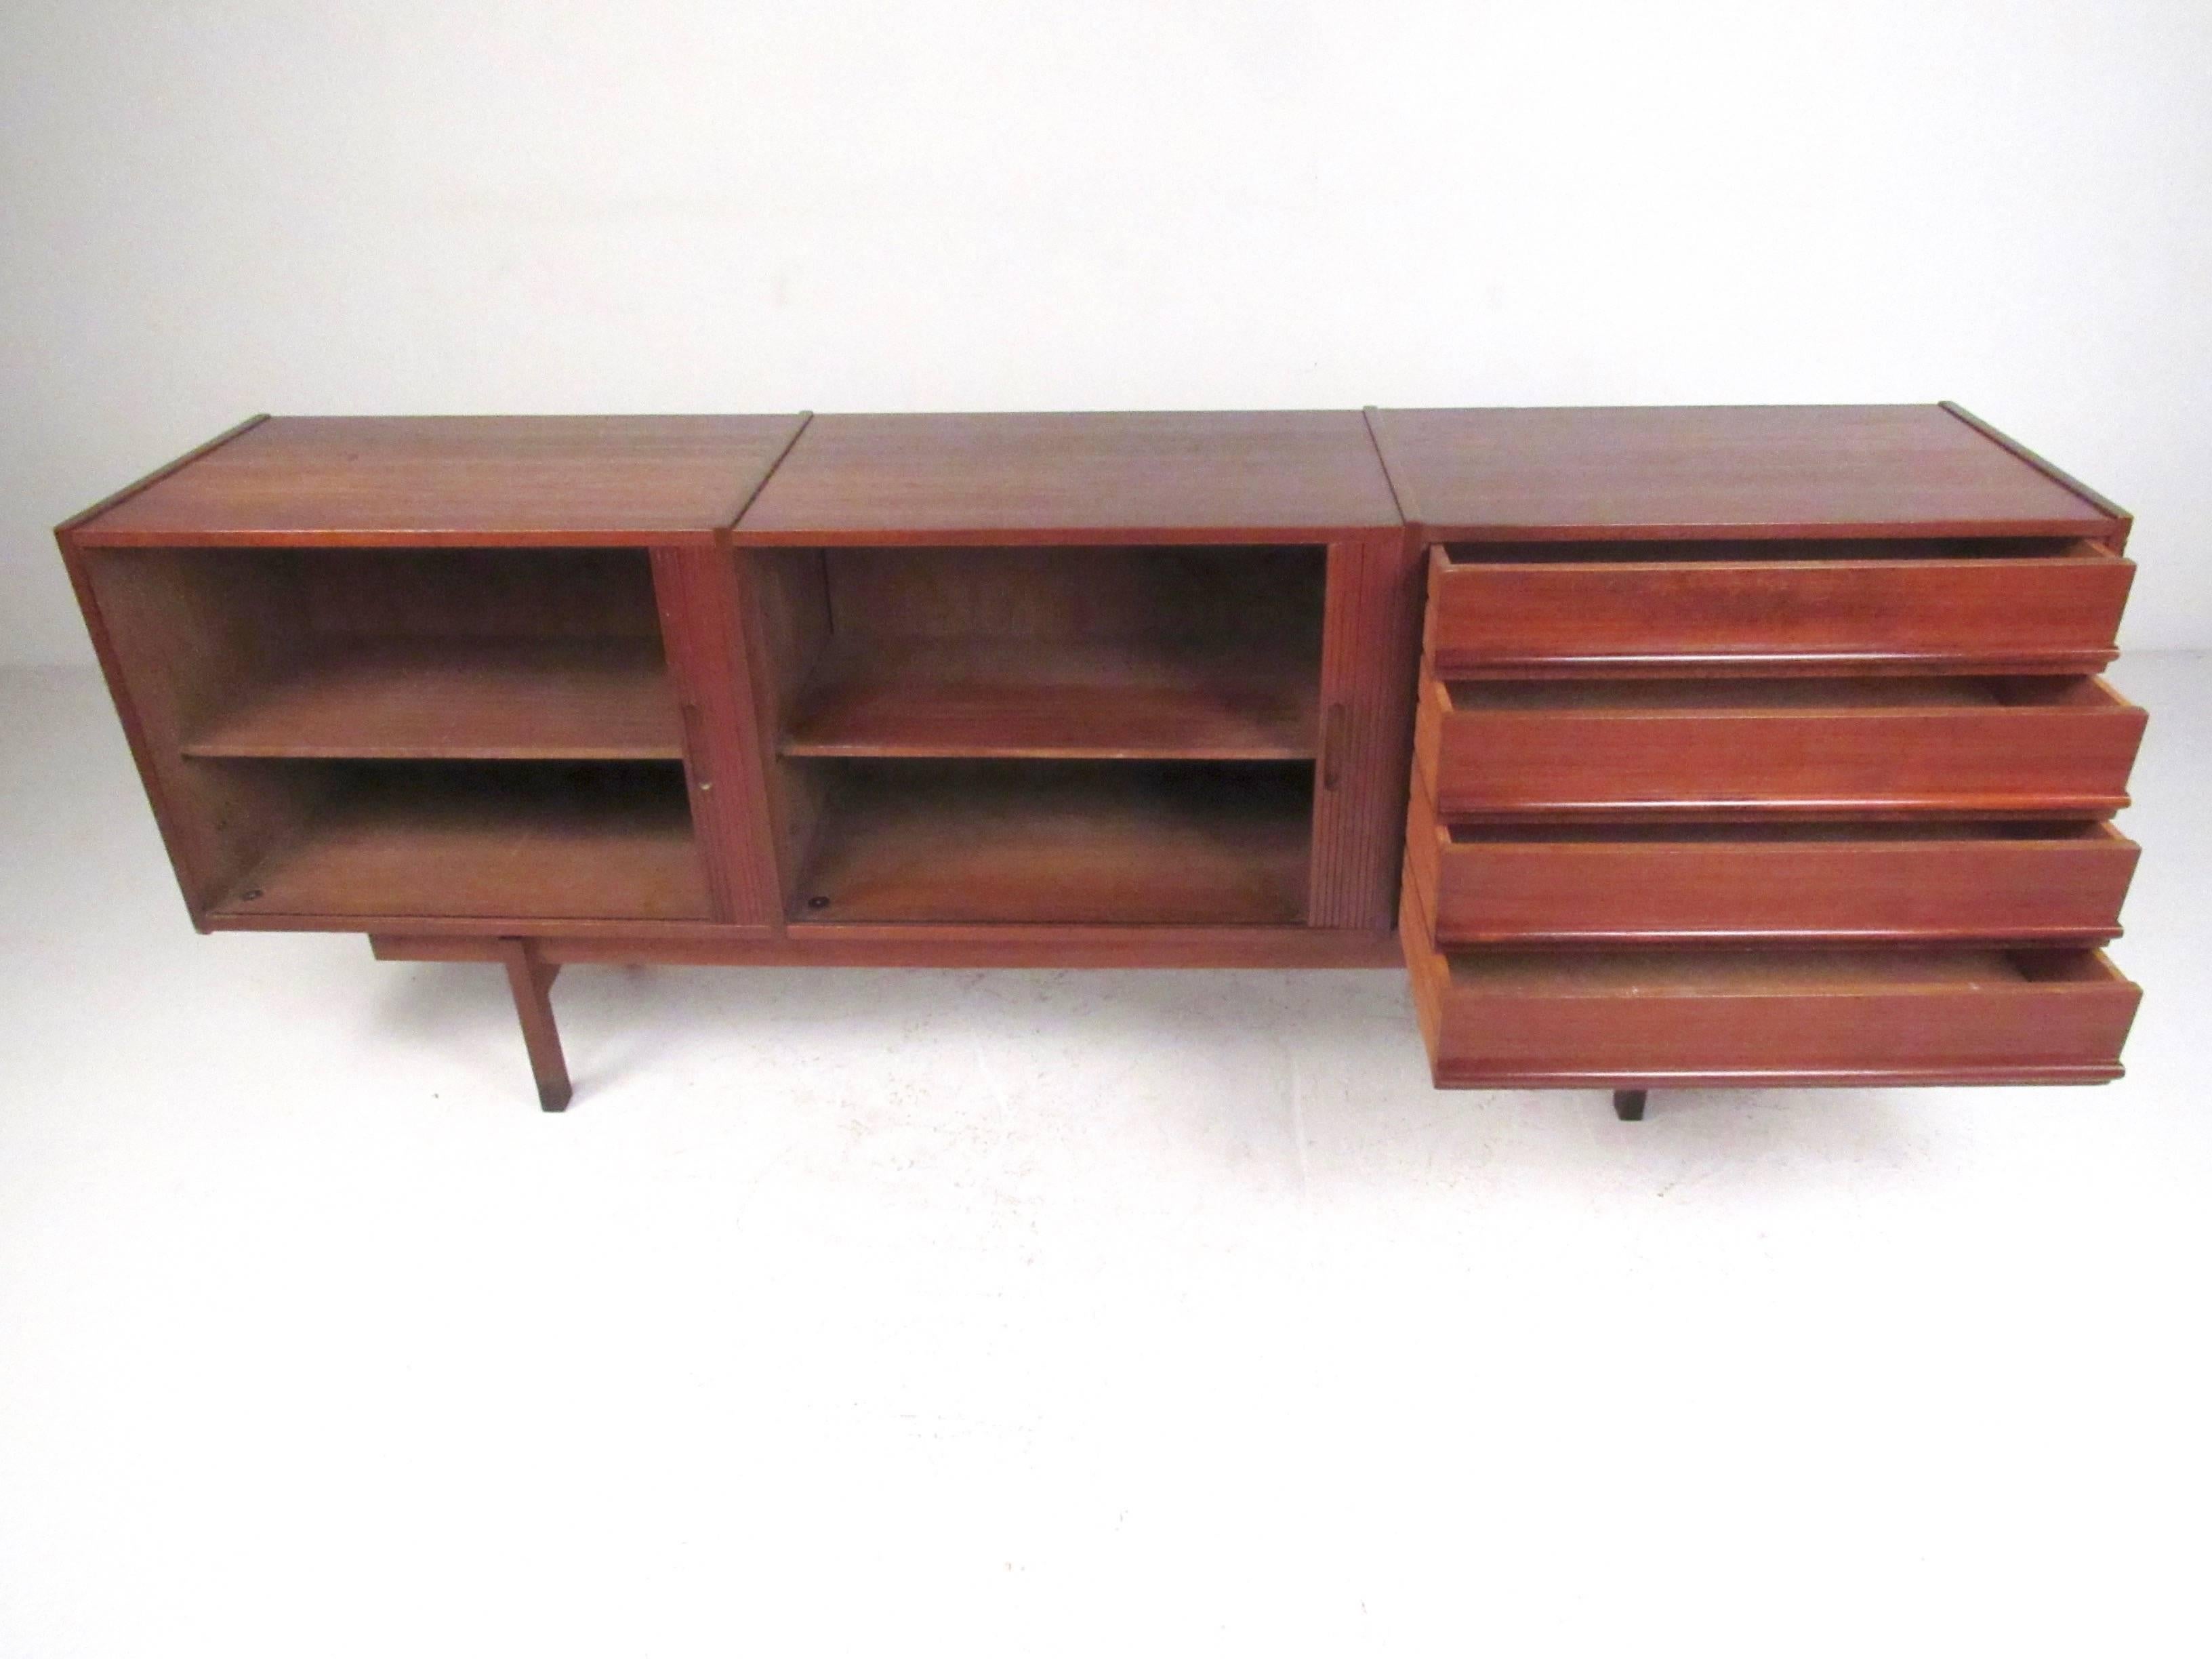 This stylish vintage teak sideboard features unique side by side tambour cabinets and four wide drawers for extra storage. The unique layout of this Mid-Century sideboard shows signs of quality 1950s construction, with raised top and shapely modern